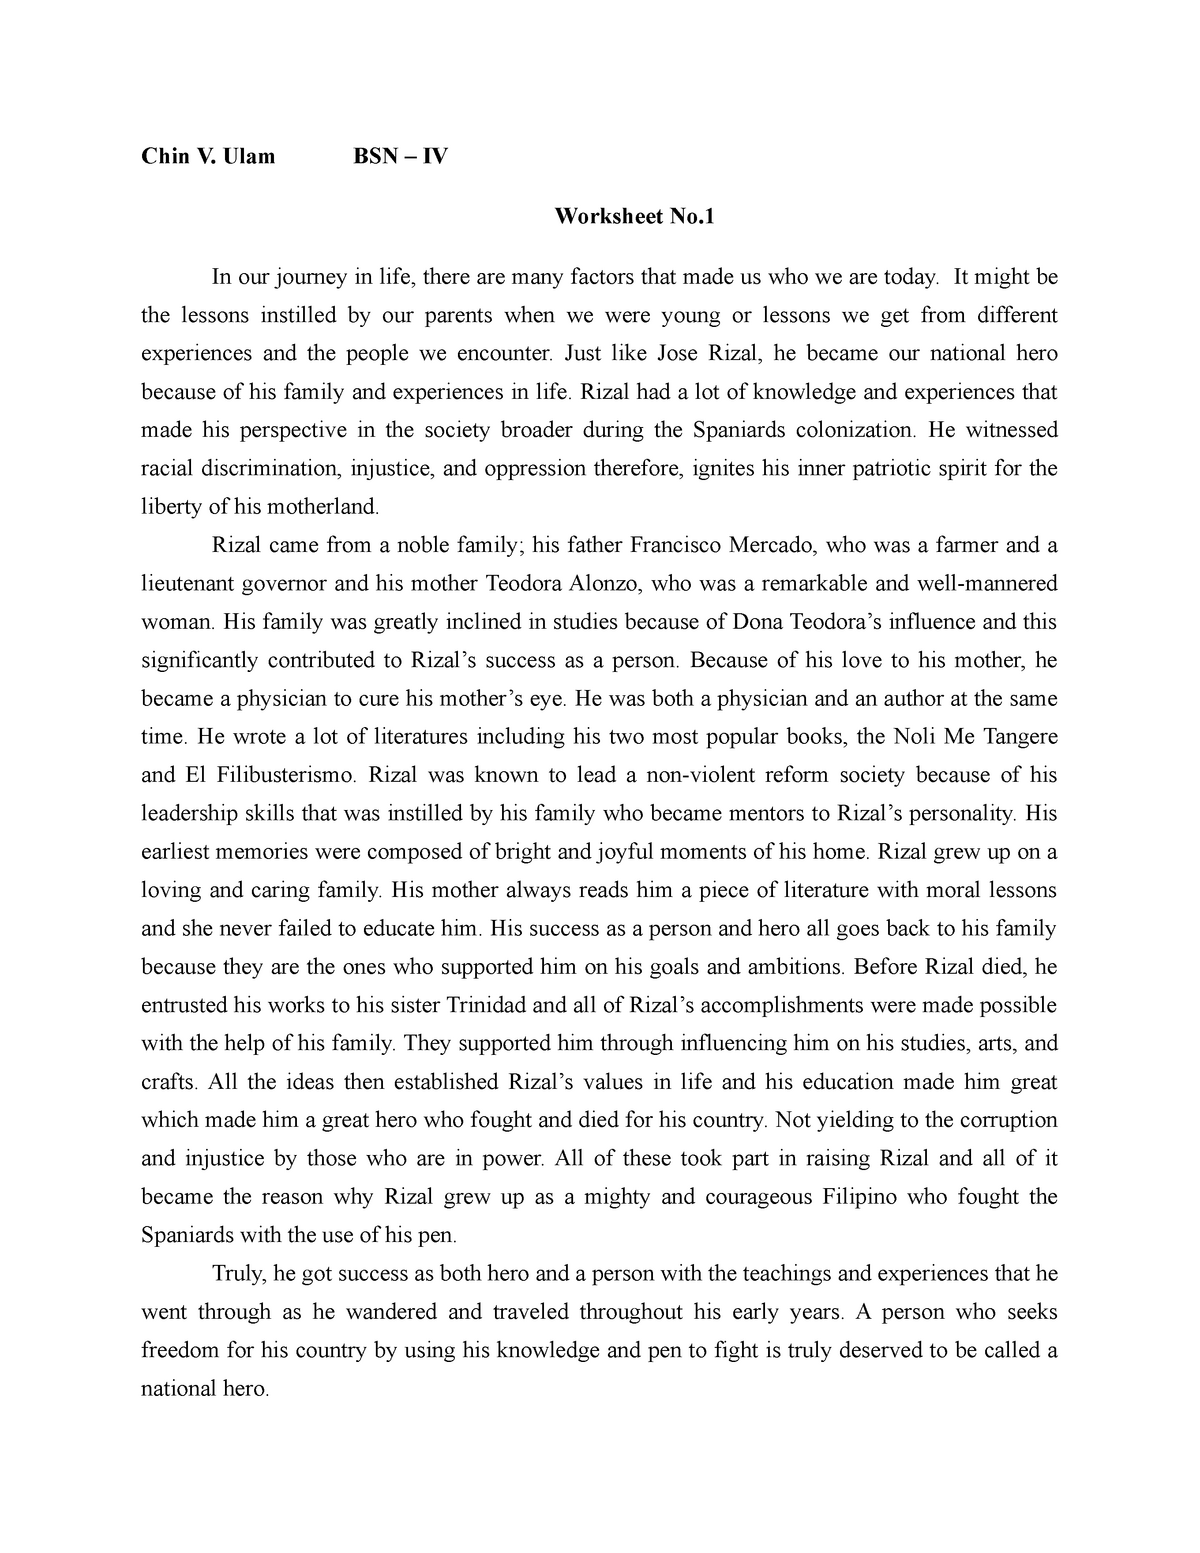 the first essay of dr. jose rizal